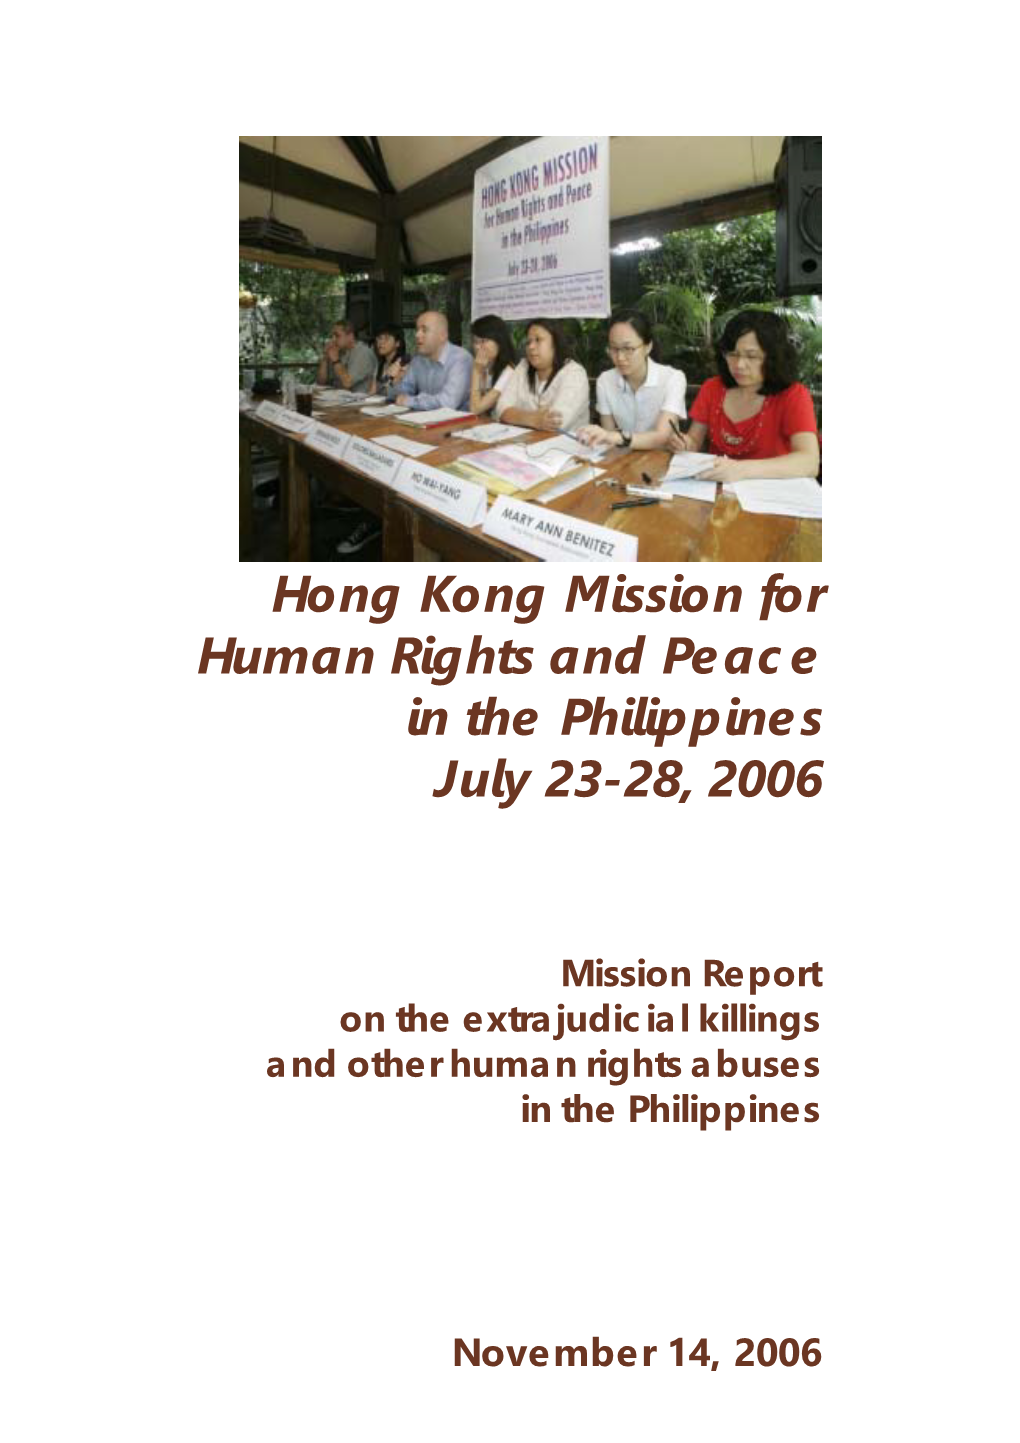 Hong Kong Mission for Human Rights and Peace in the Philippines July 23-28, 2006